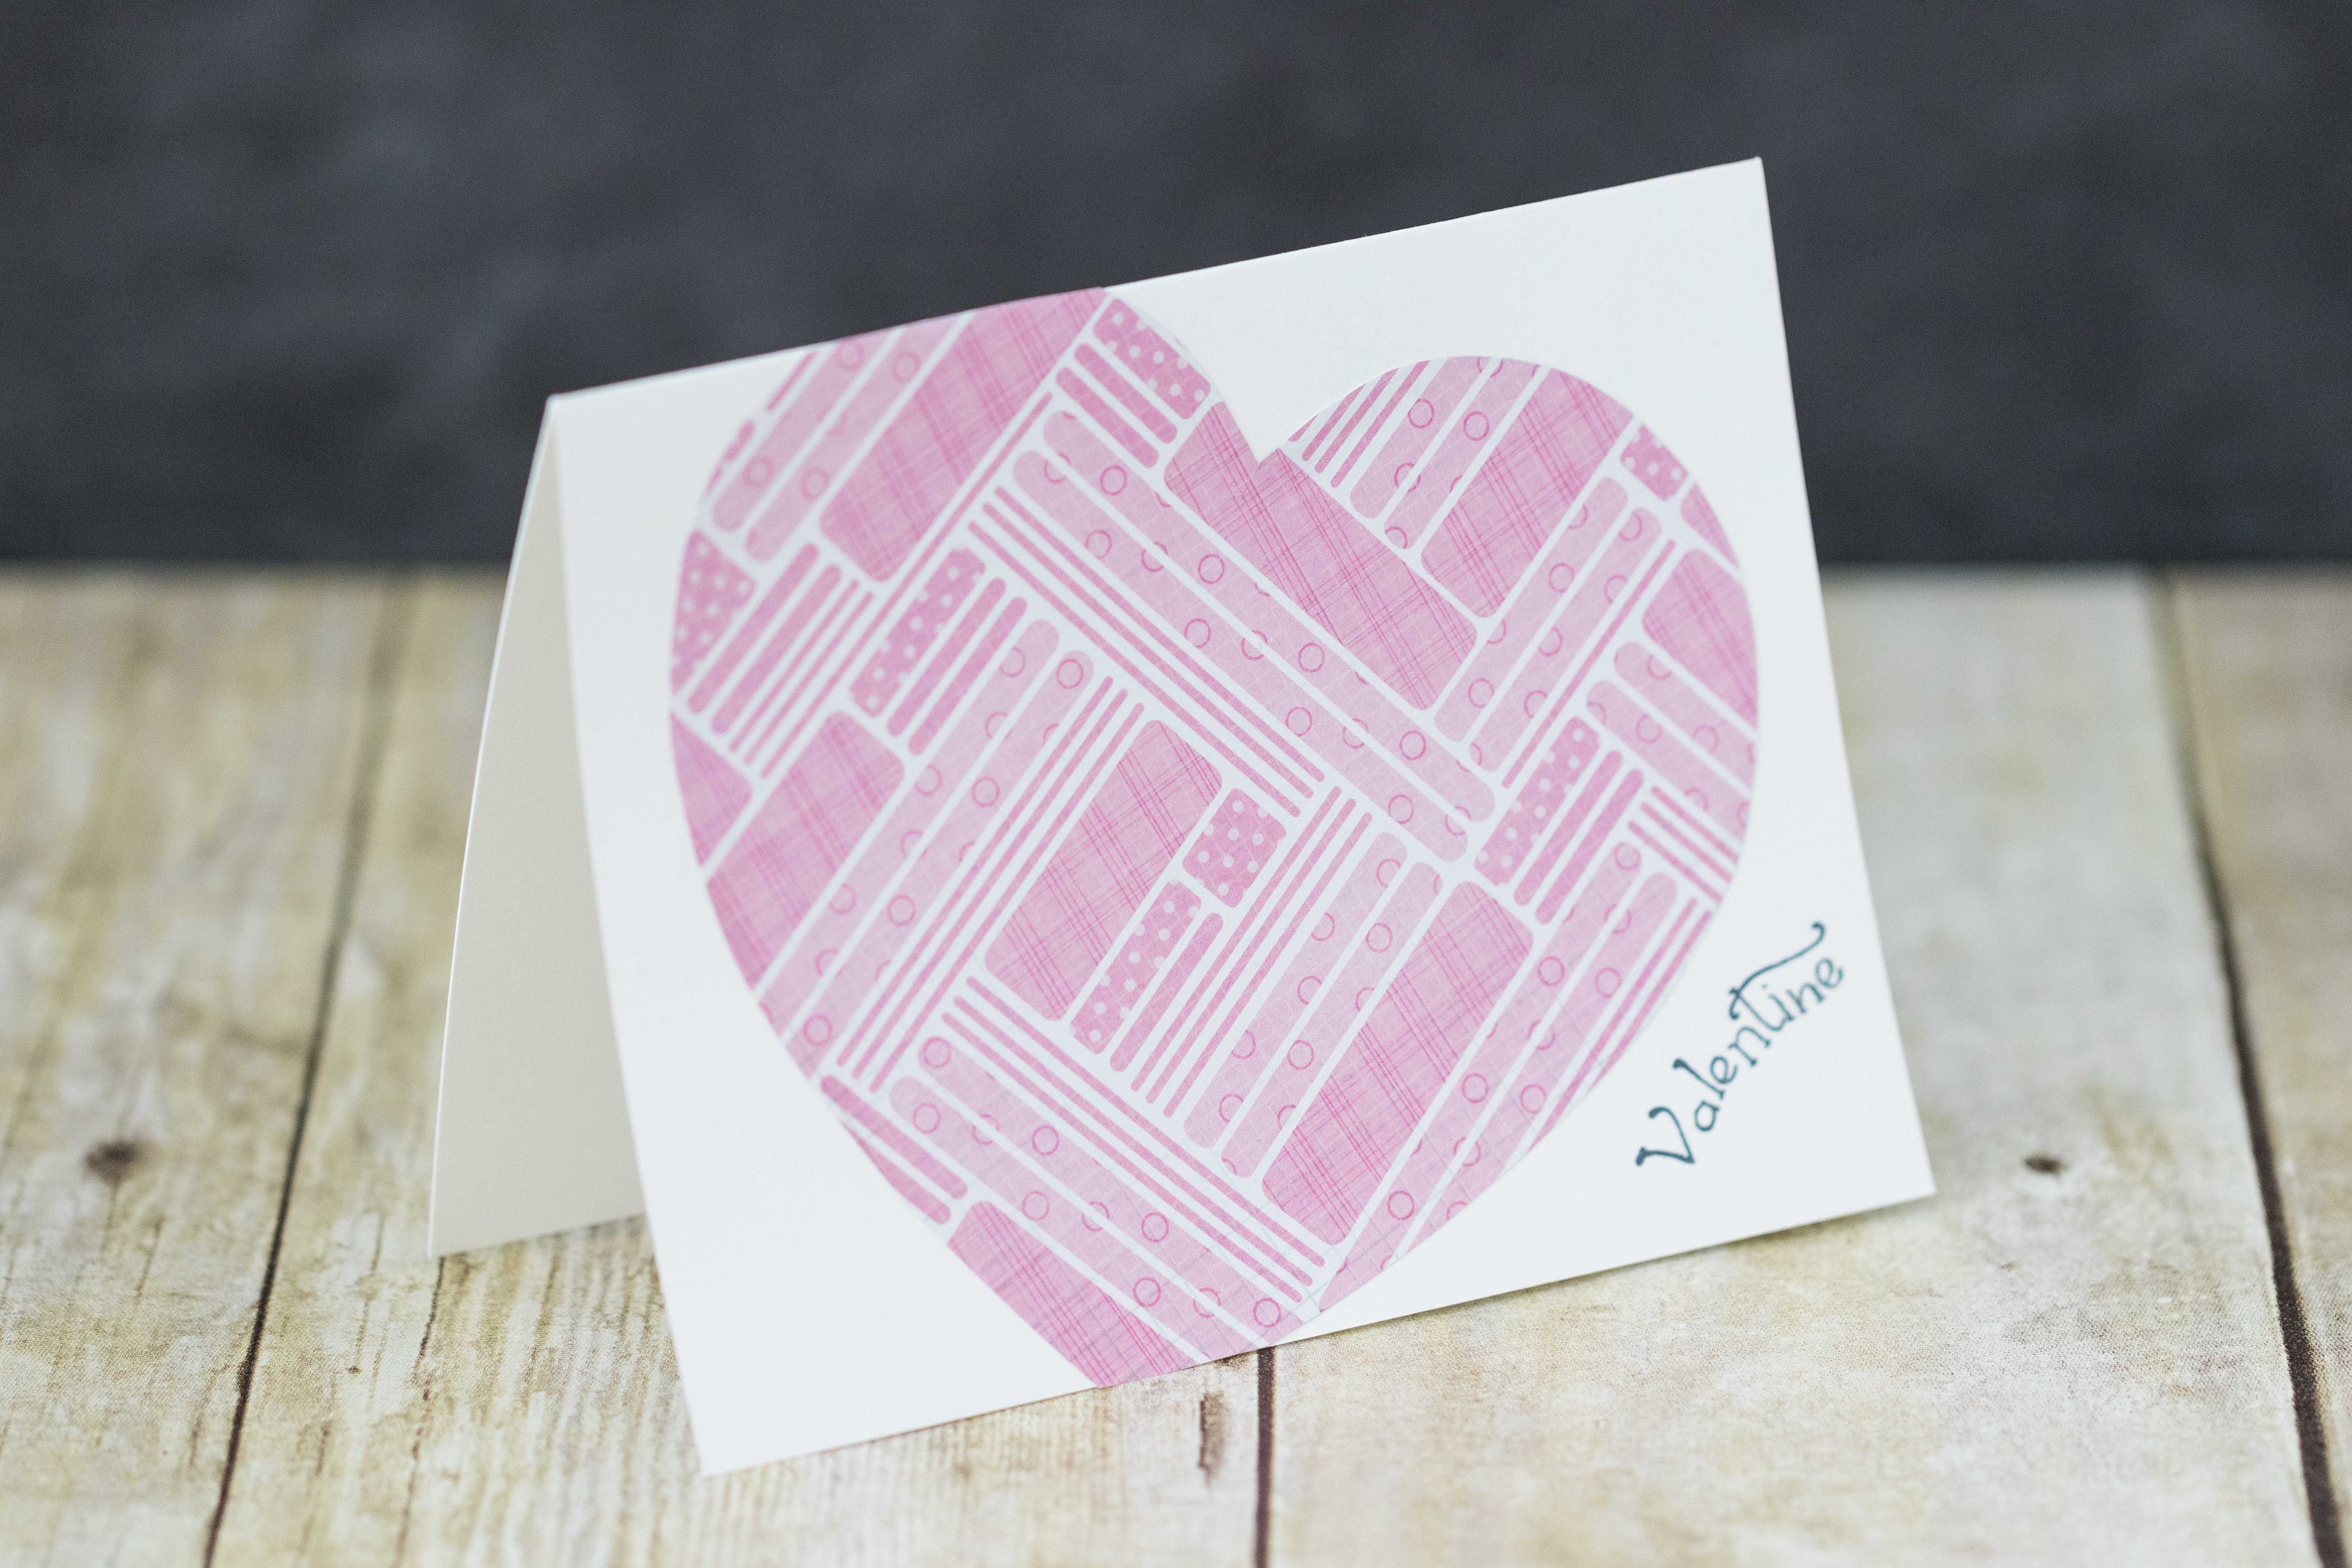 10 Simple DIY Valentine's Day Cards | https://www.roseclearfield.com